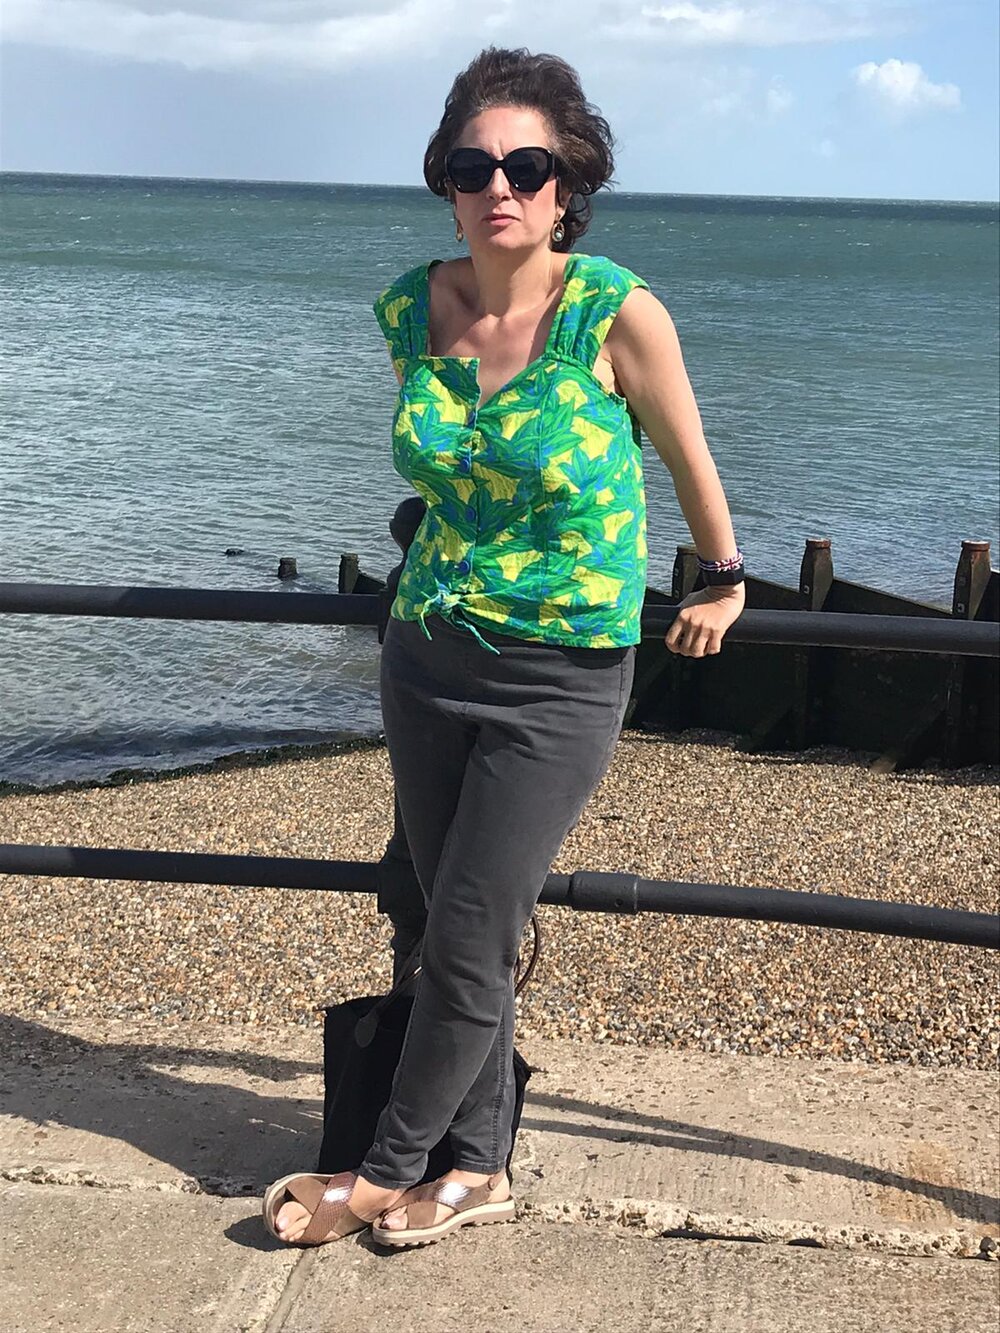 Vicki enjoying some down time on a day trip to Whitstable in 2020. Photo: Lacuna Voices